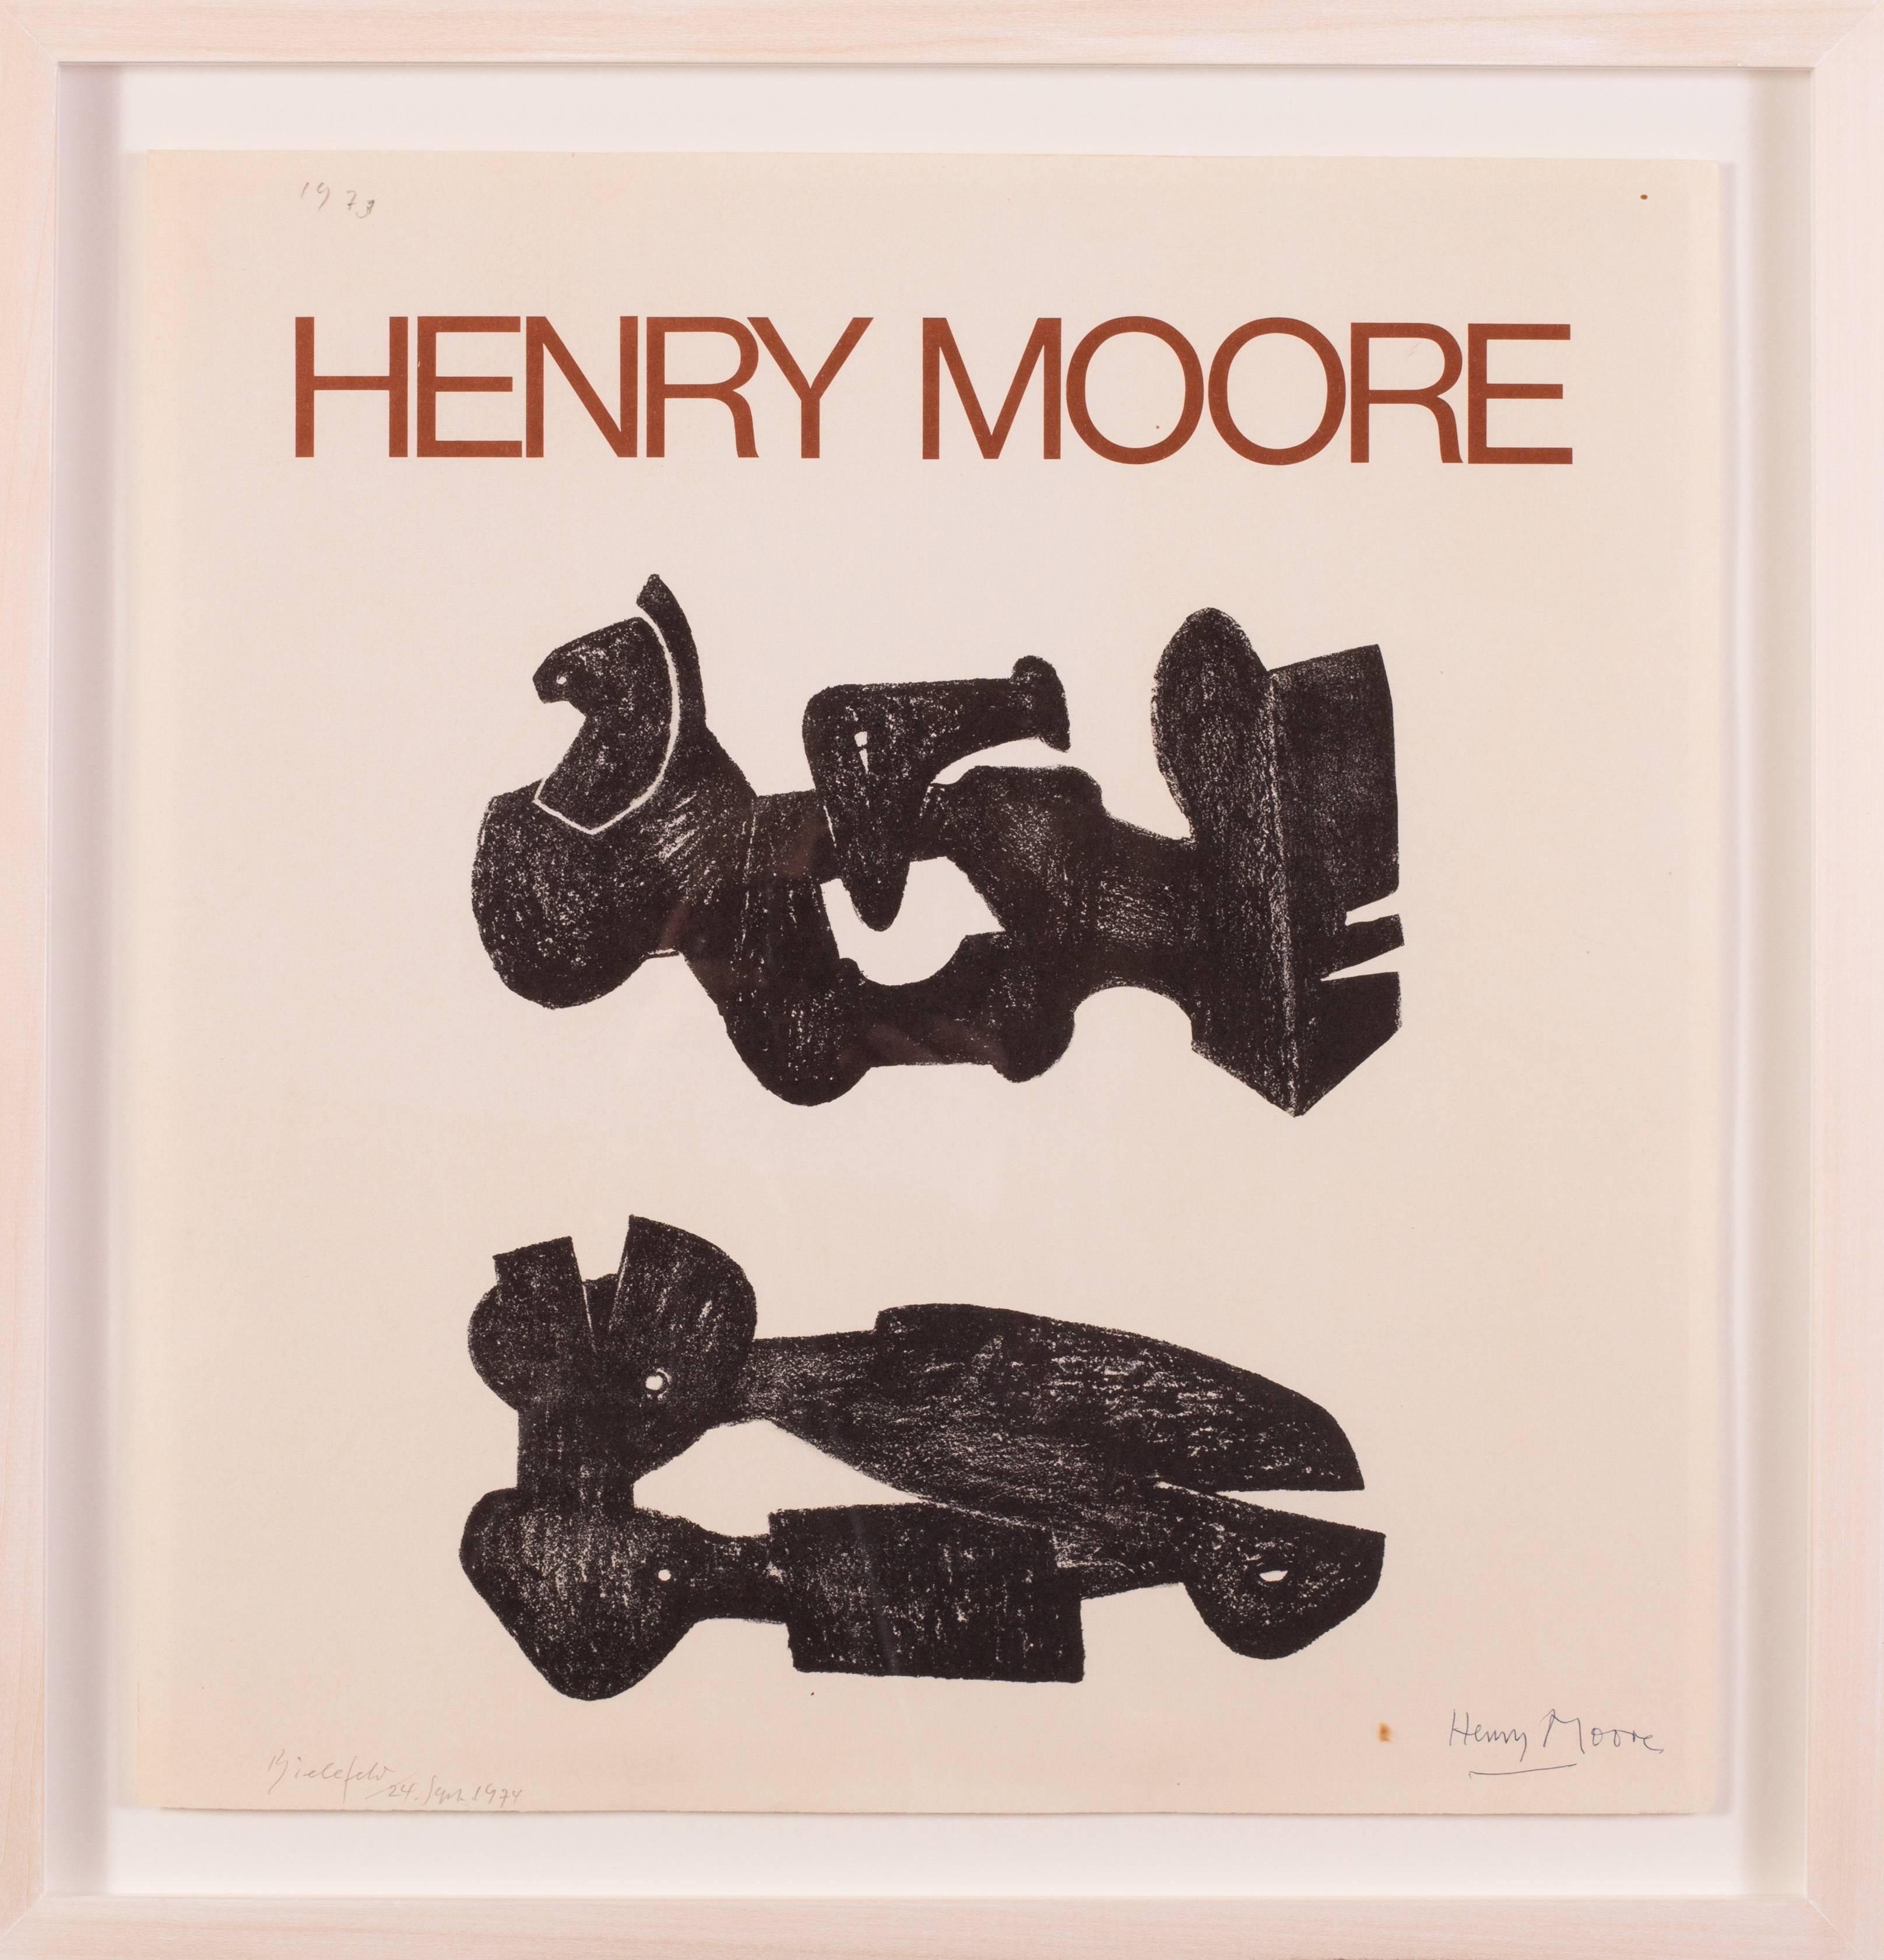 Henry Moore Abstract Print - 2 Black Forms – Metal figures (Cramer 307)